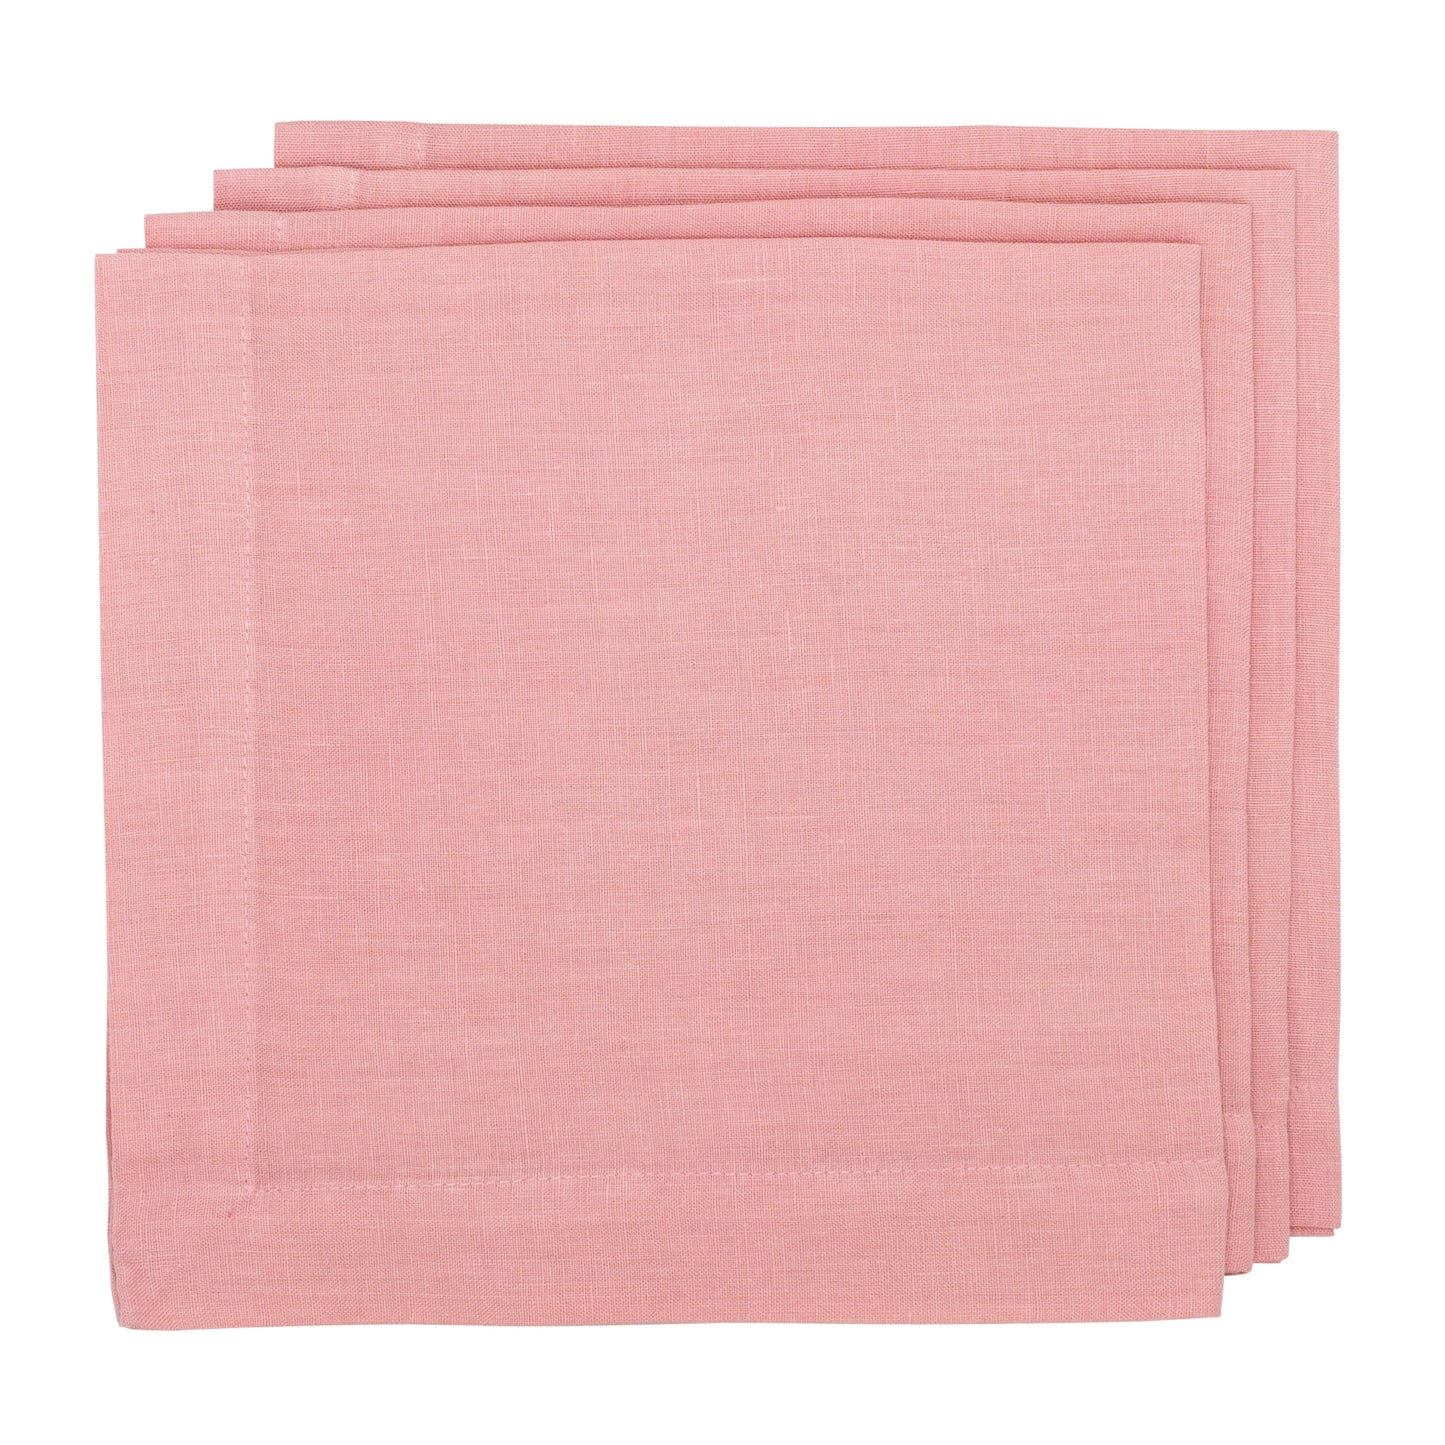 LIMITED EDITION Easter Collection, HG Signature Hand-dyed Linen Napkins, Set of 4